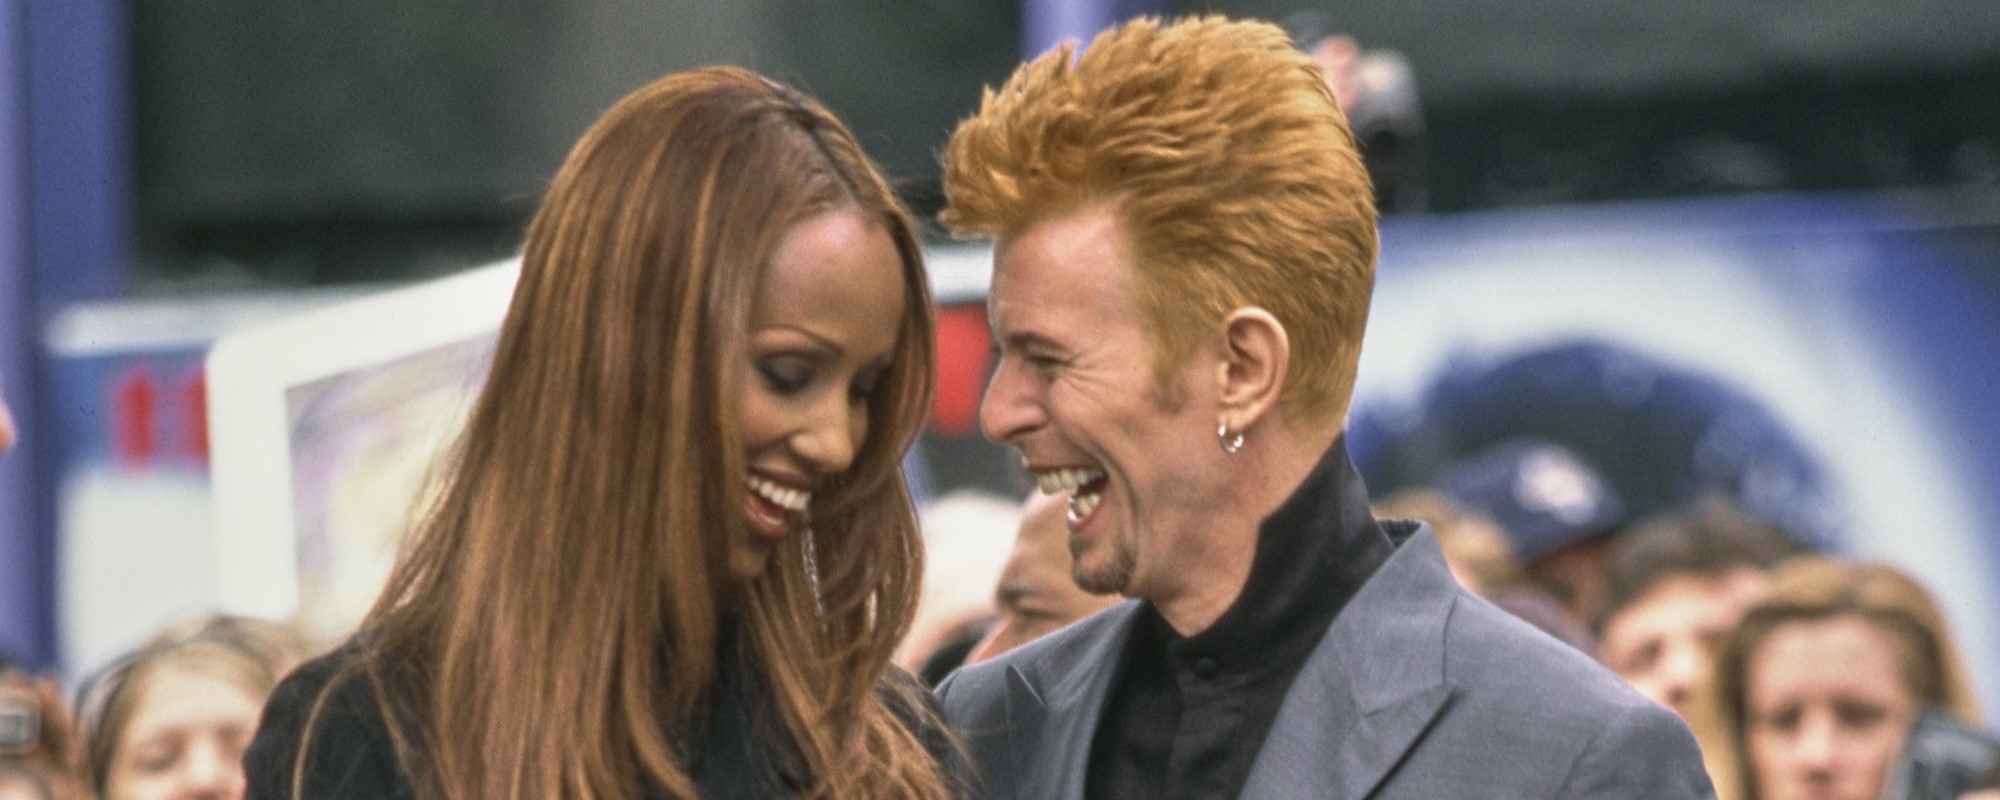 “Eternal Love”: David Bowie’s Widow, Iman, Marks What Would’ve Been the Couple’s 32nd Anniversary